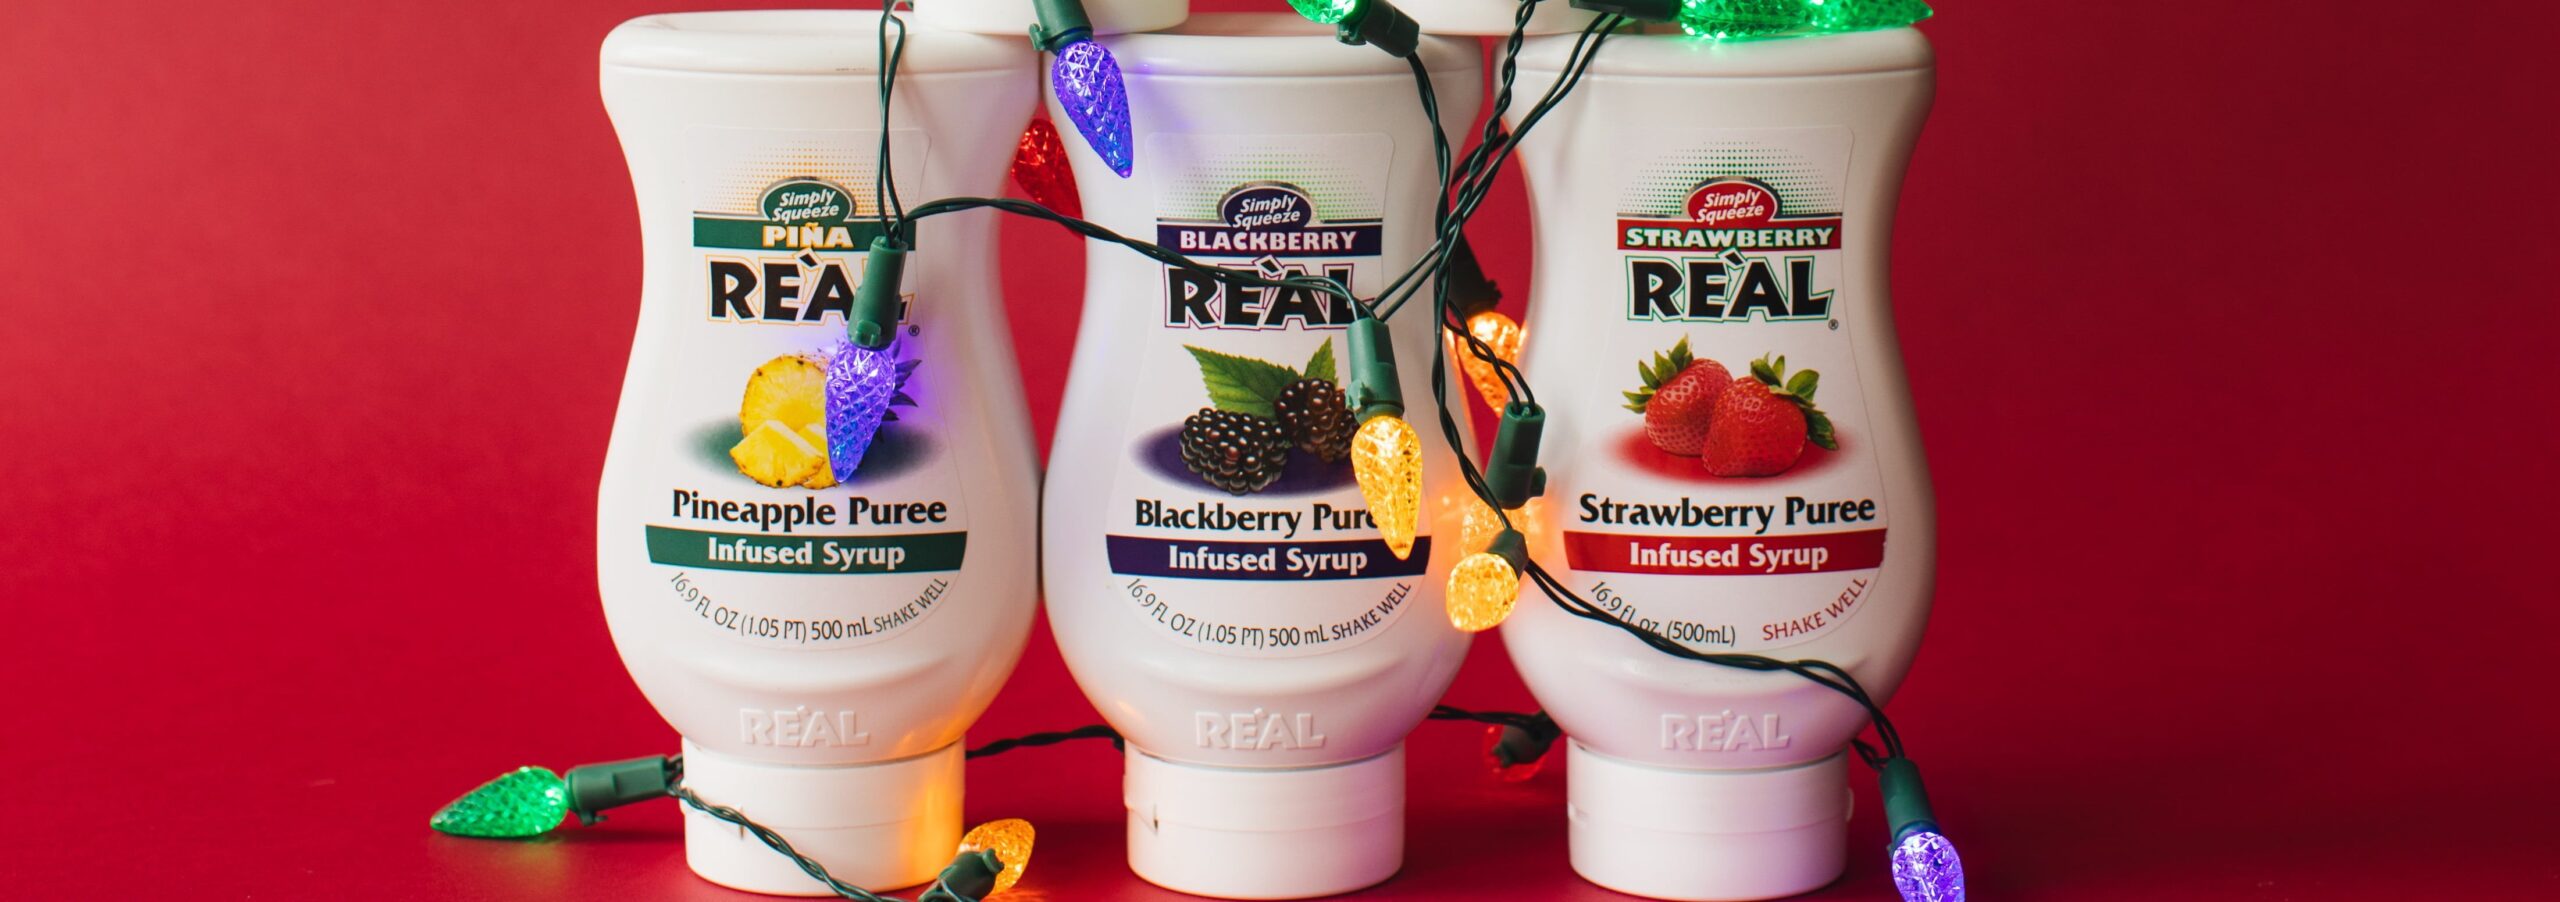 Making Spirits Bright with Real Holiday Cocktails